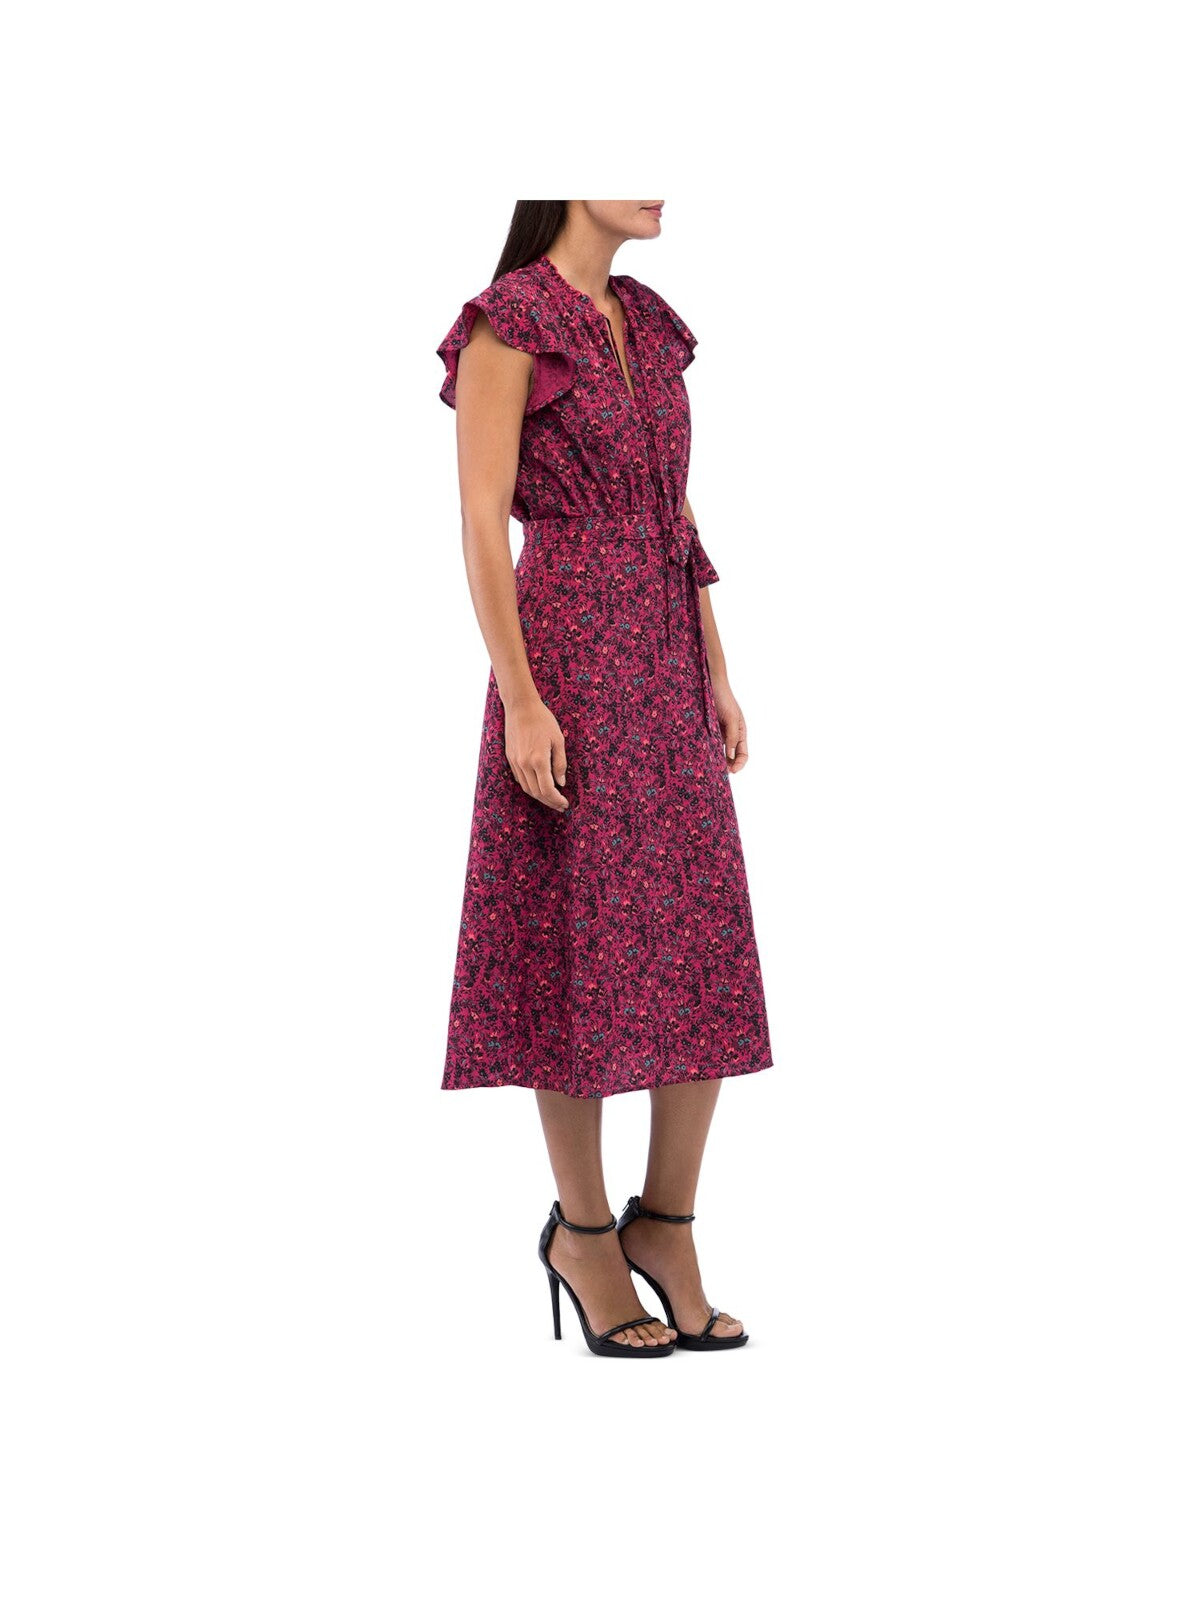 B COLLECTION Womens Pink Ruffled Belted Tie Neck Lined Floral Flutter Sleeve Keyhole Midi Wear To Work Fit + Flare Dress XL